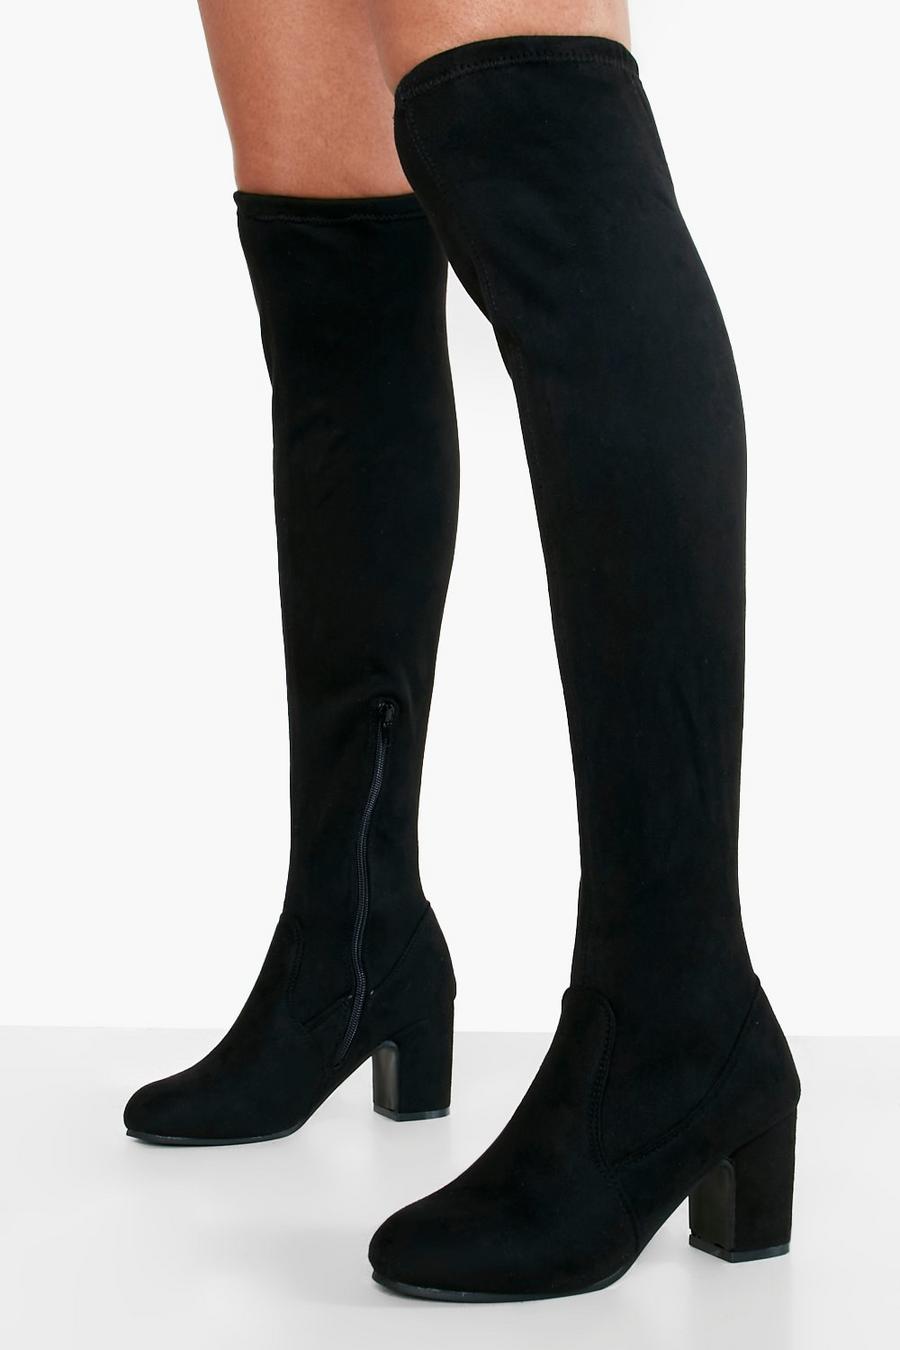 Black nero Wide Fit Block Heel Stretch Over The Knee Boots